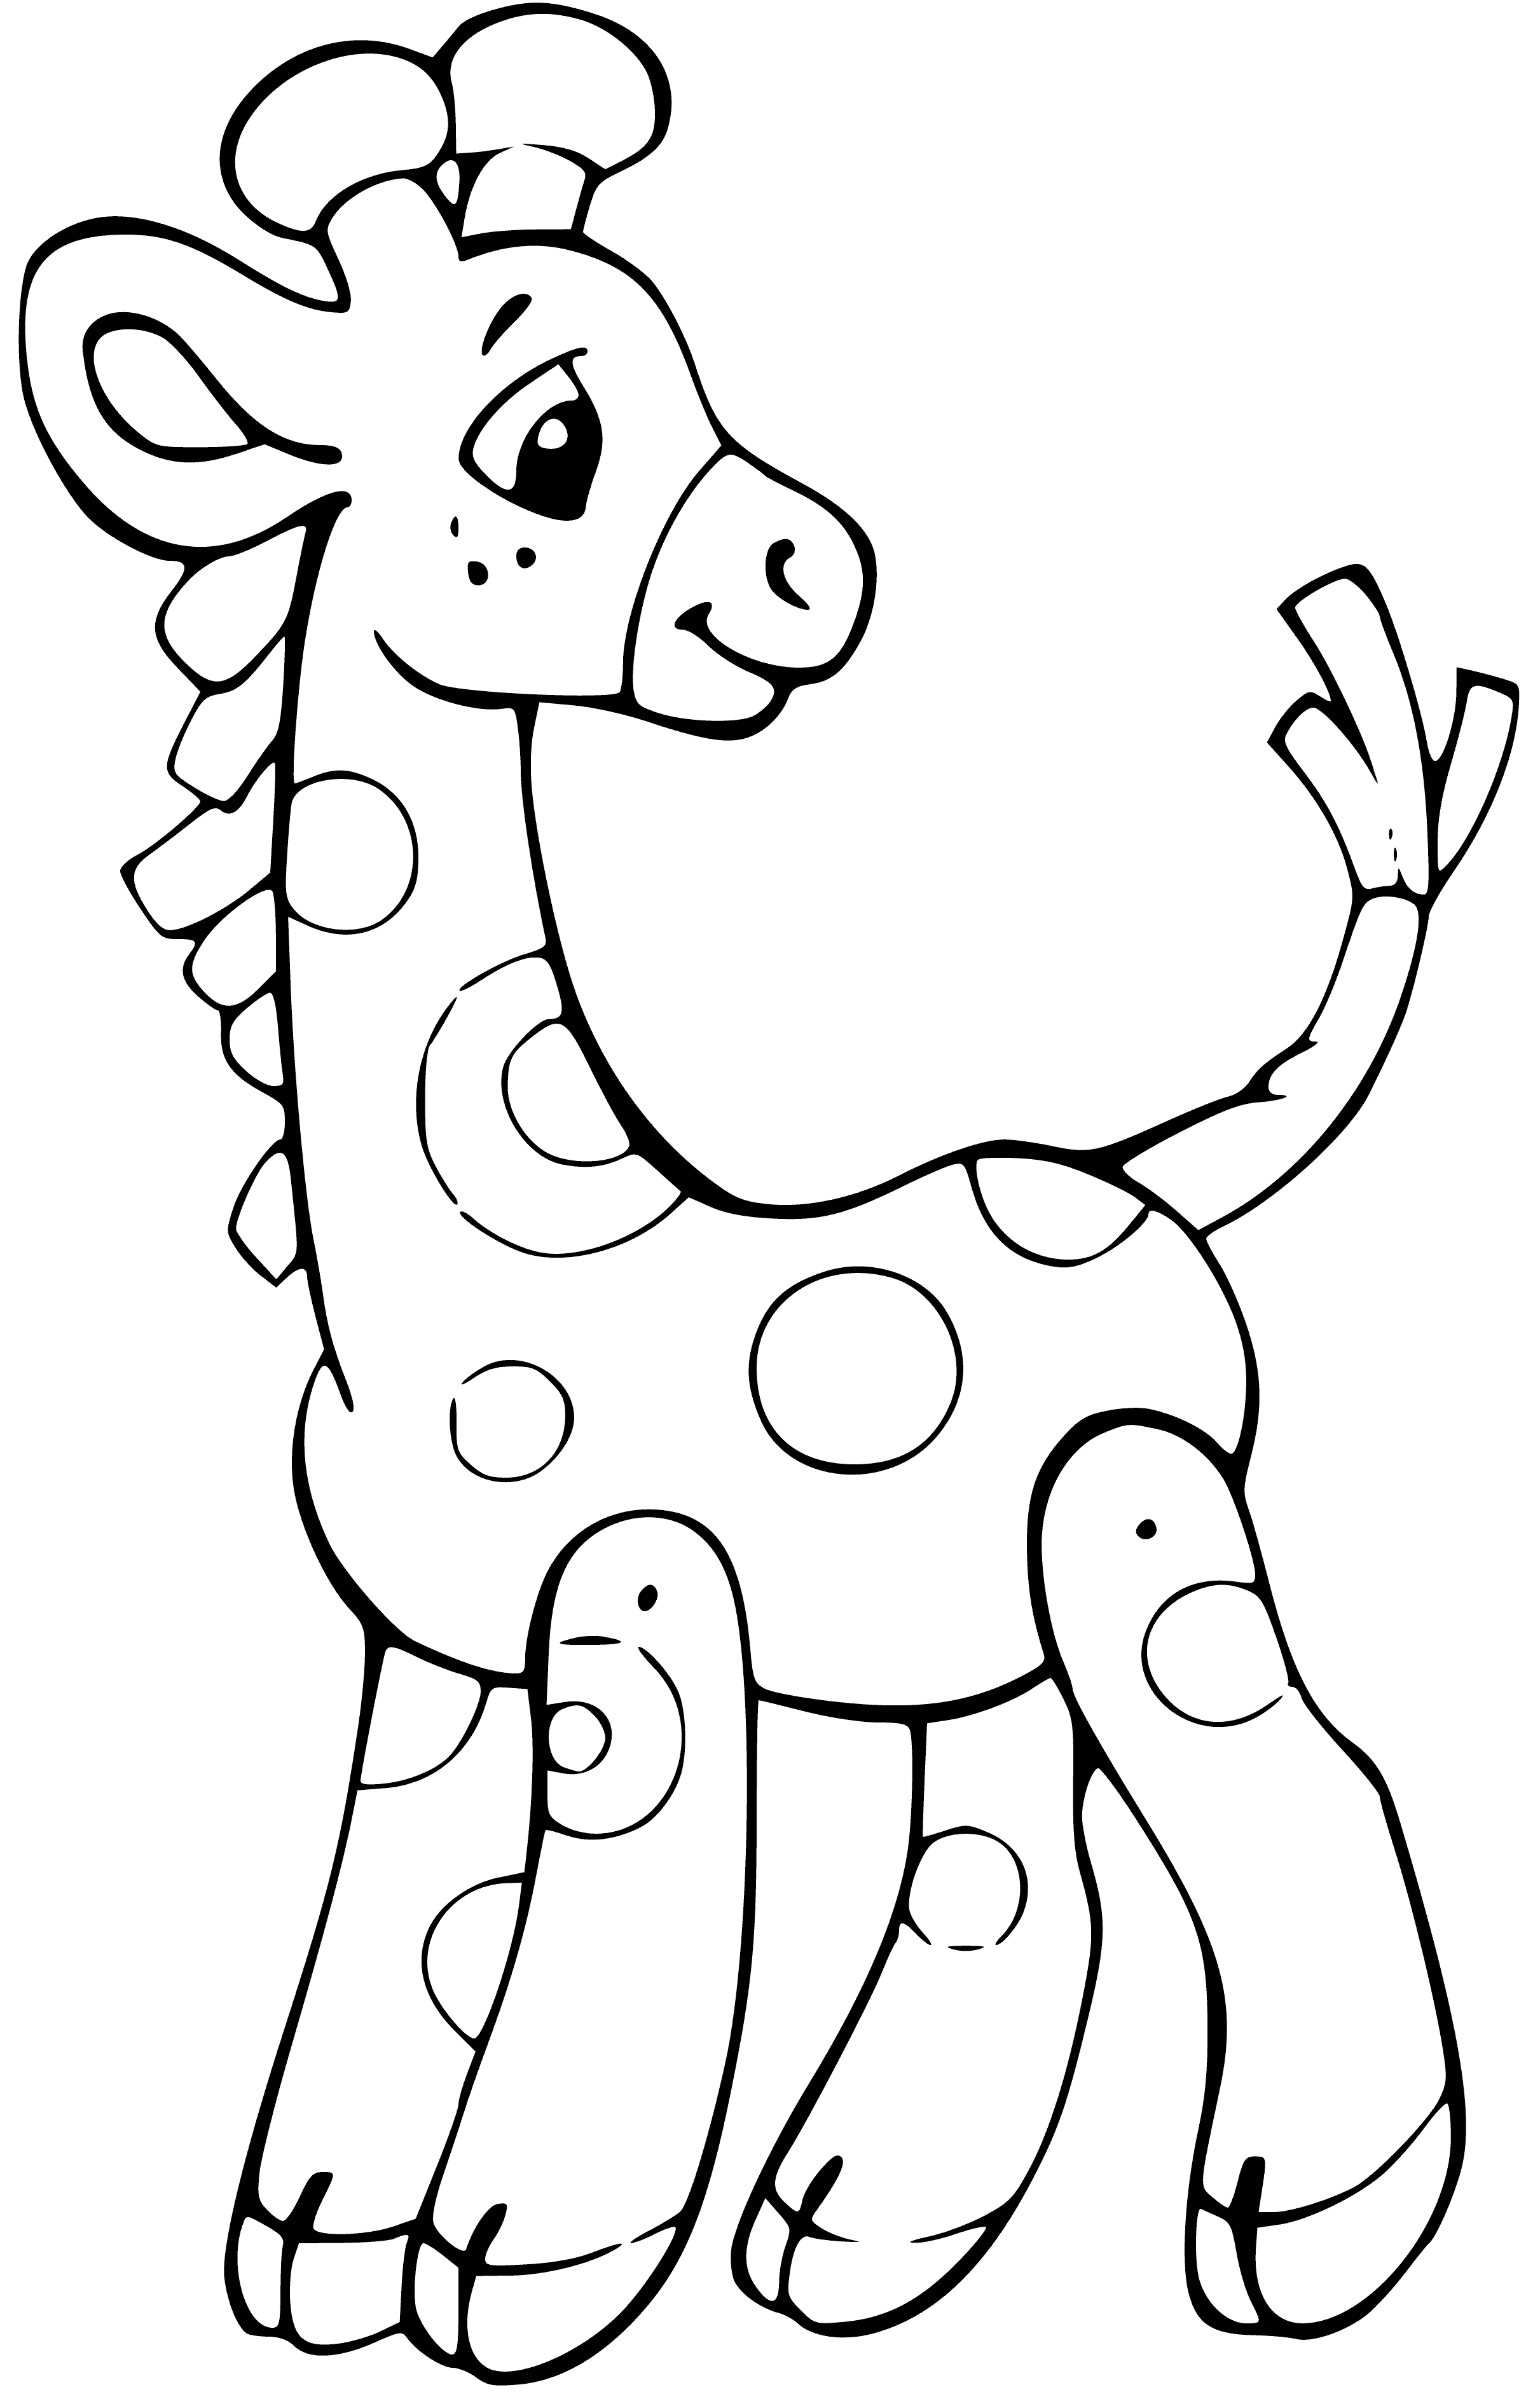 coloring page: Giraffes are tall African mammals w/ long necks; record-sized bull shot in Kenya, 1934 was 6m & weighed 2,000kg.